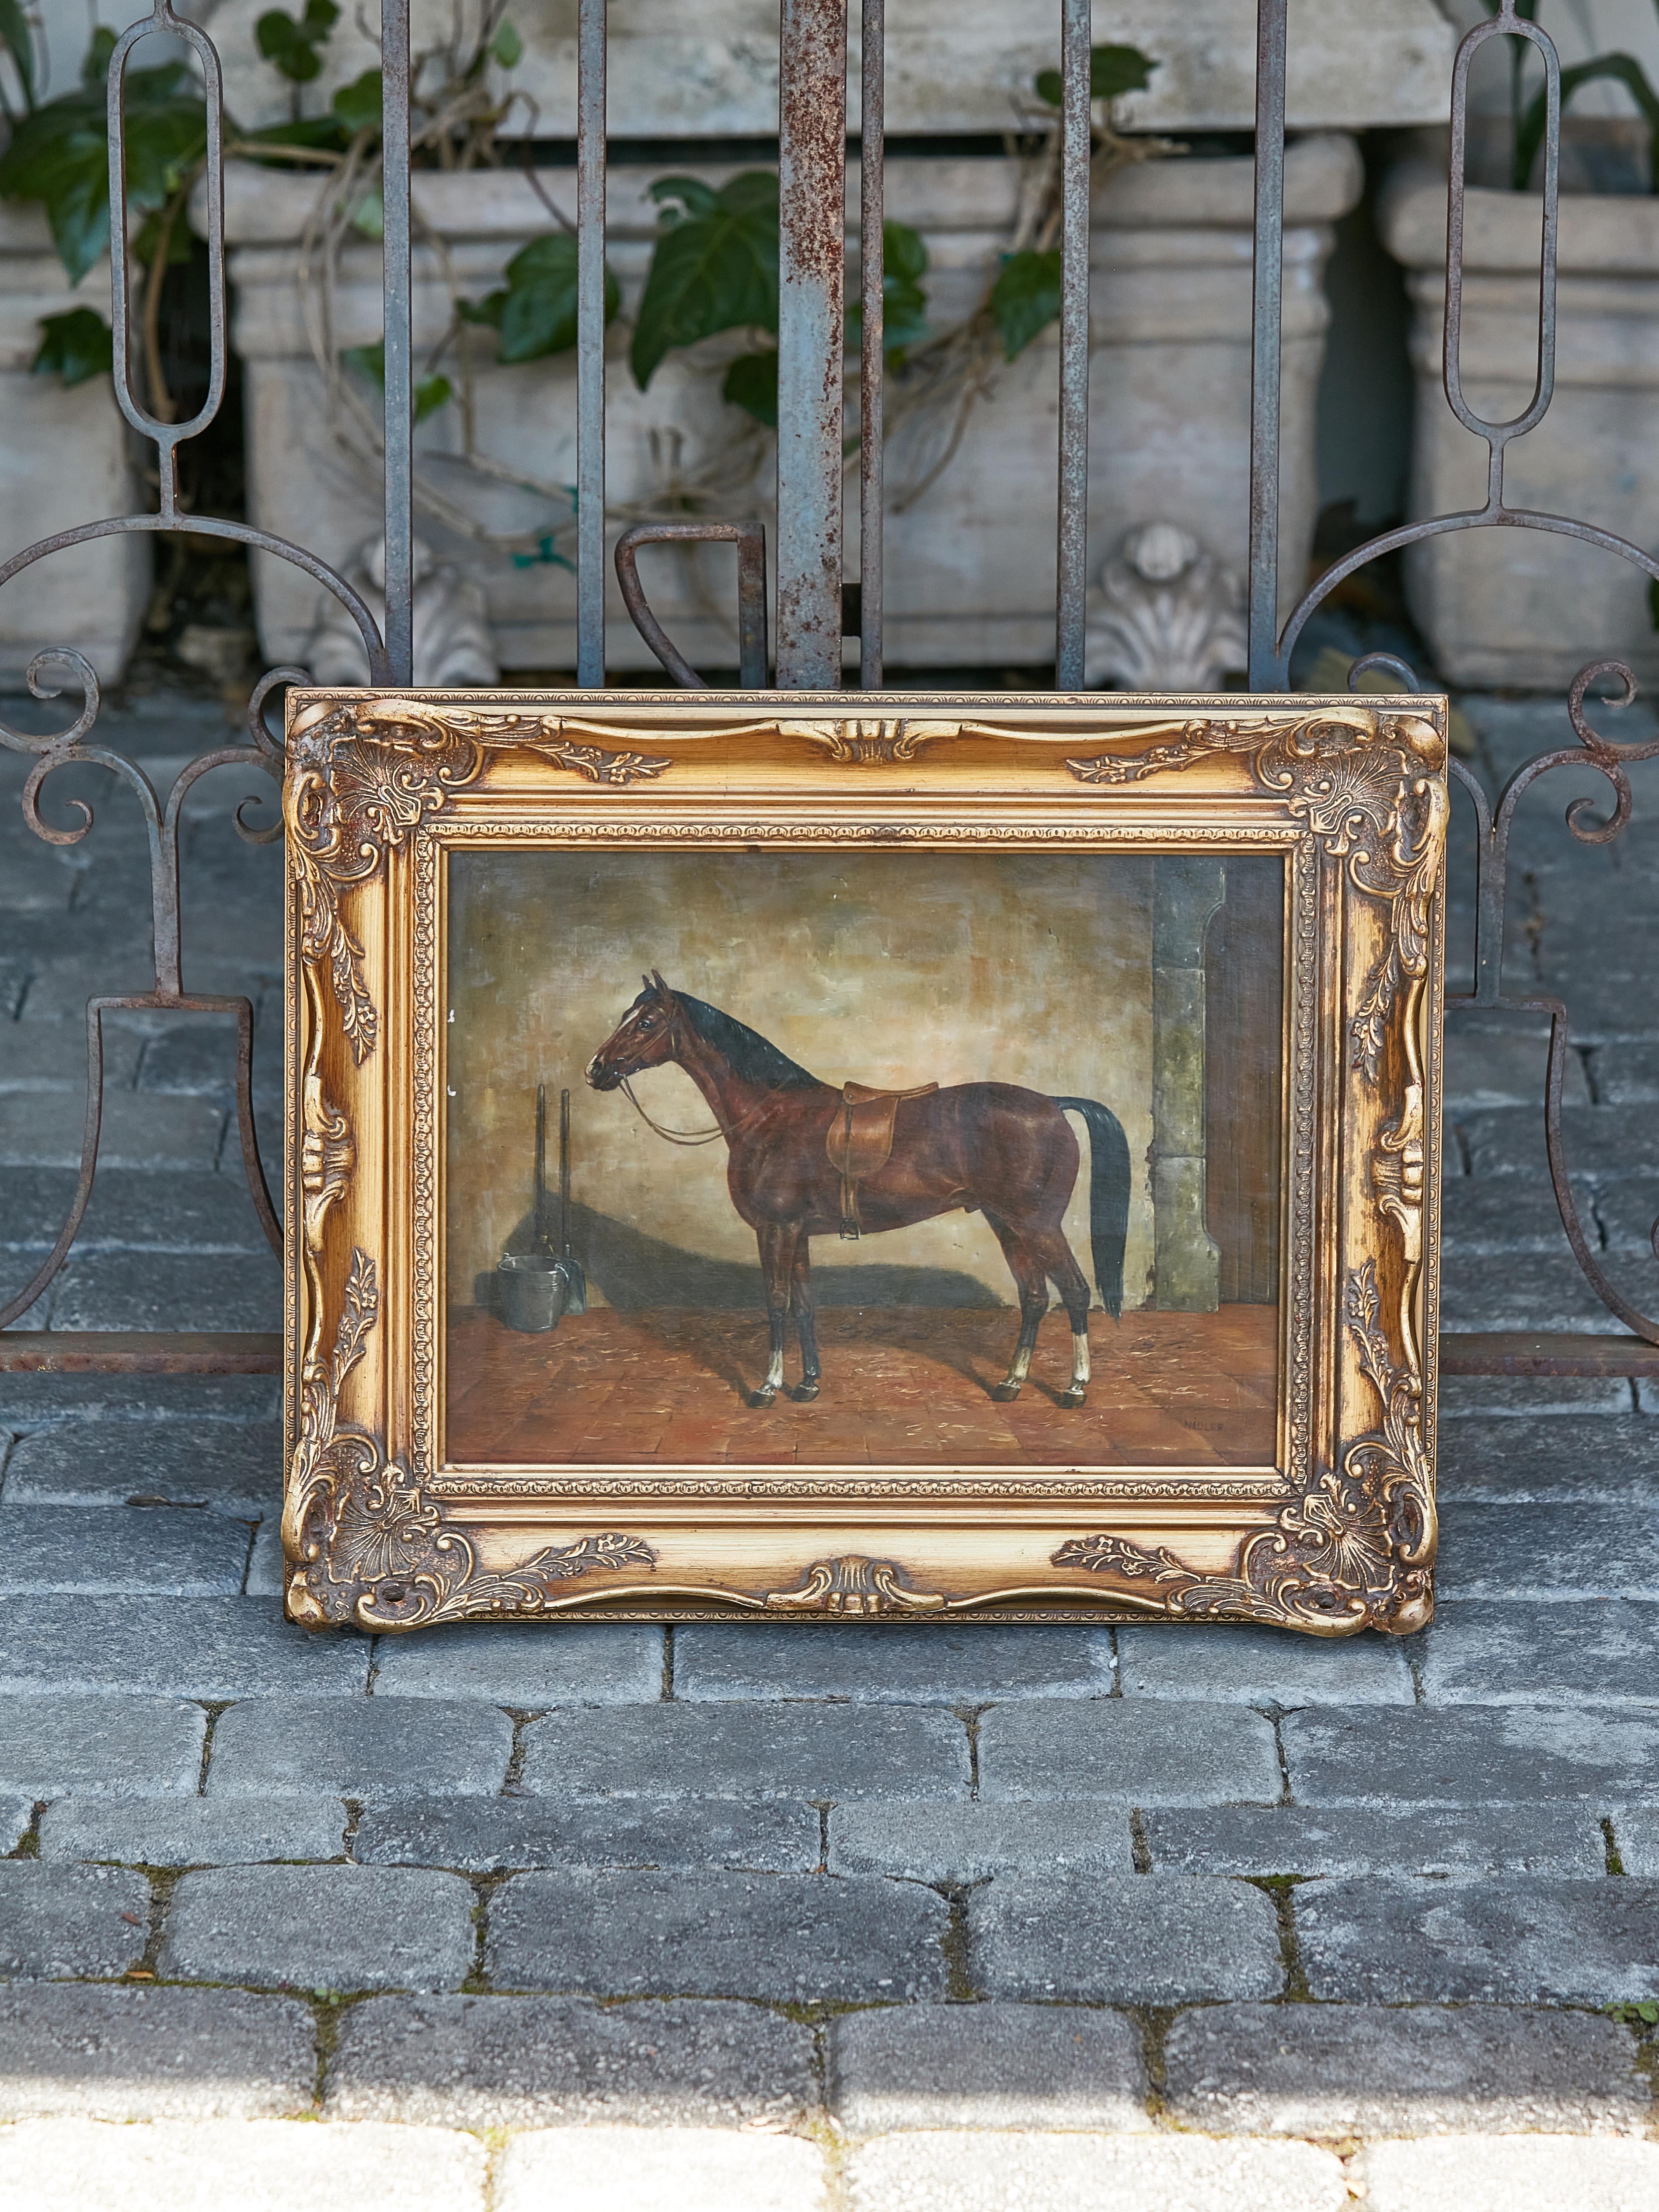 An English oil on board horse painting from the 20th century by K.M Nadler, in carved giltwood frame. Immerse yourself in a captivating depiction of equine grace with this mesmerizing 20th-century oil on board horse painting by the artist K.M.